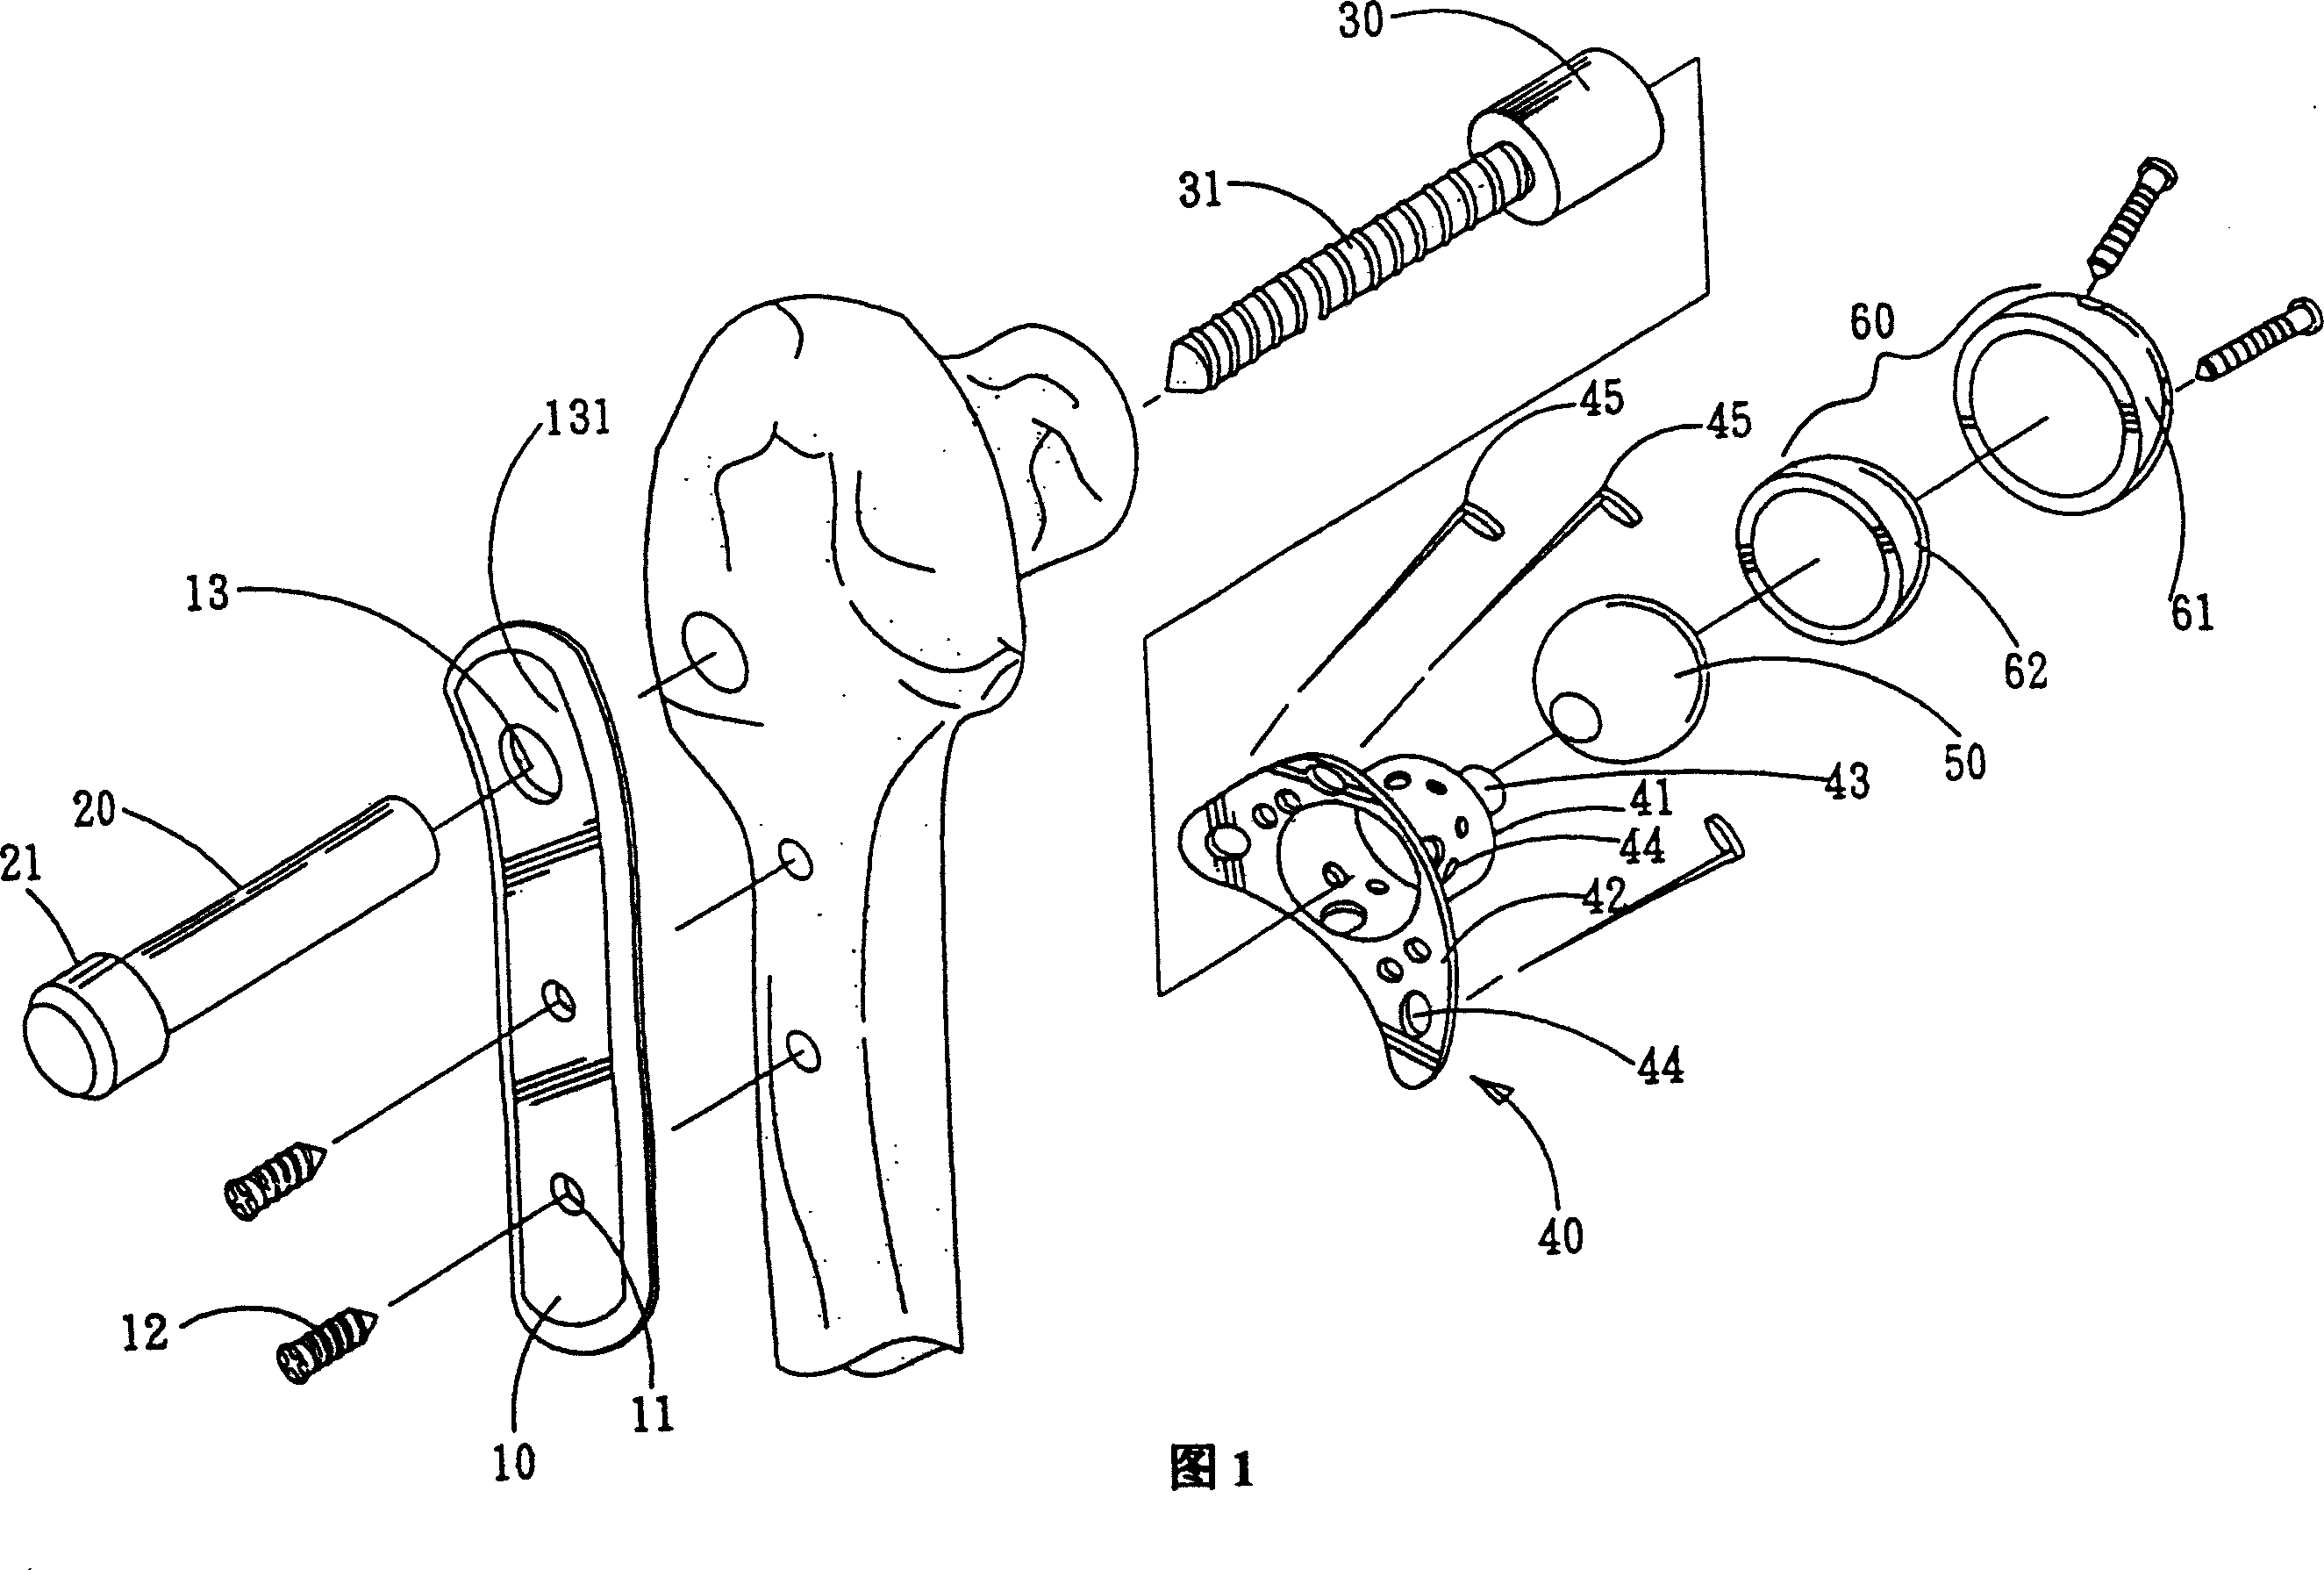 Artificial hip joint device without handle